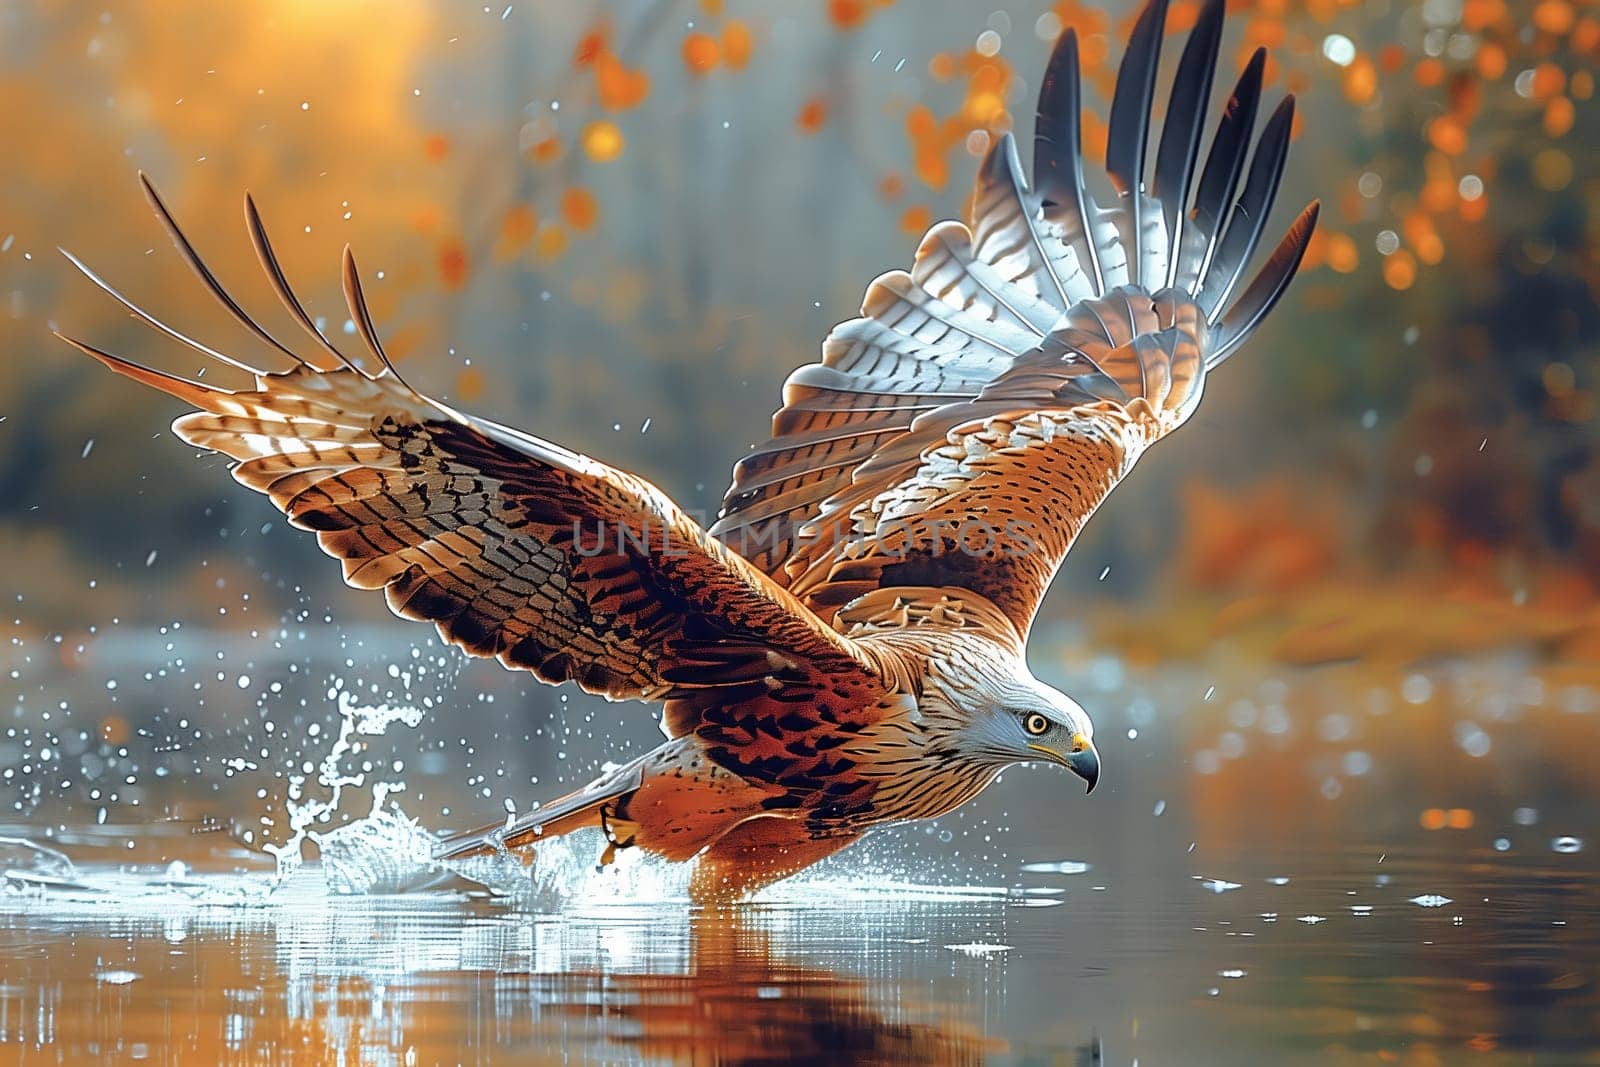 an eagle is flying over a body of water by richwolf